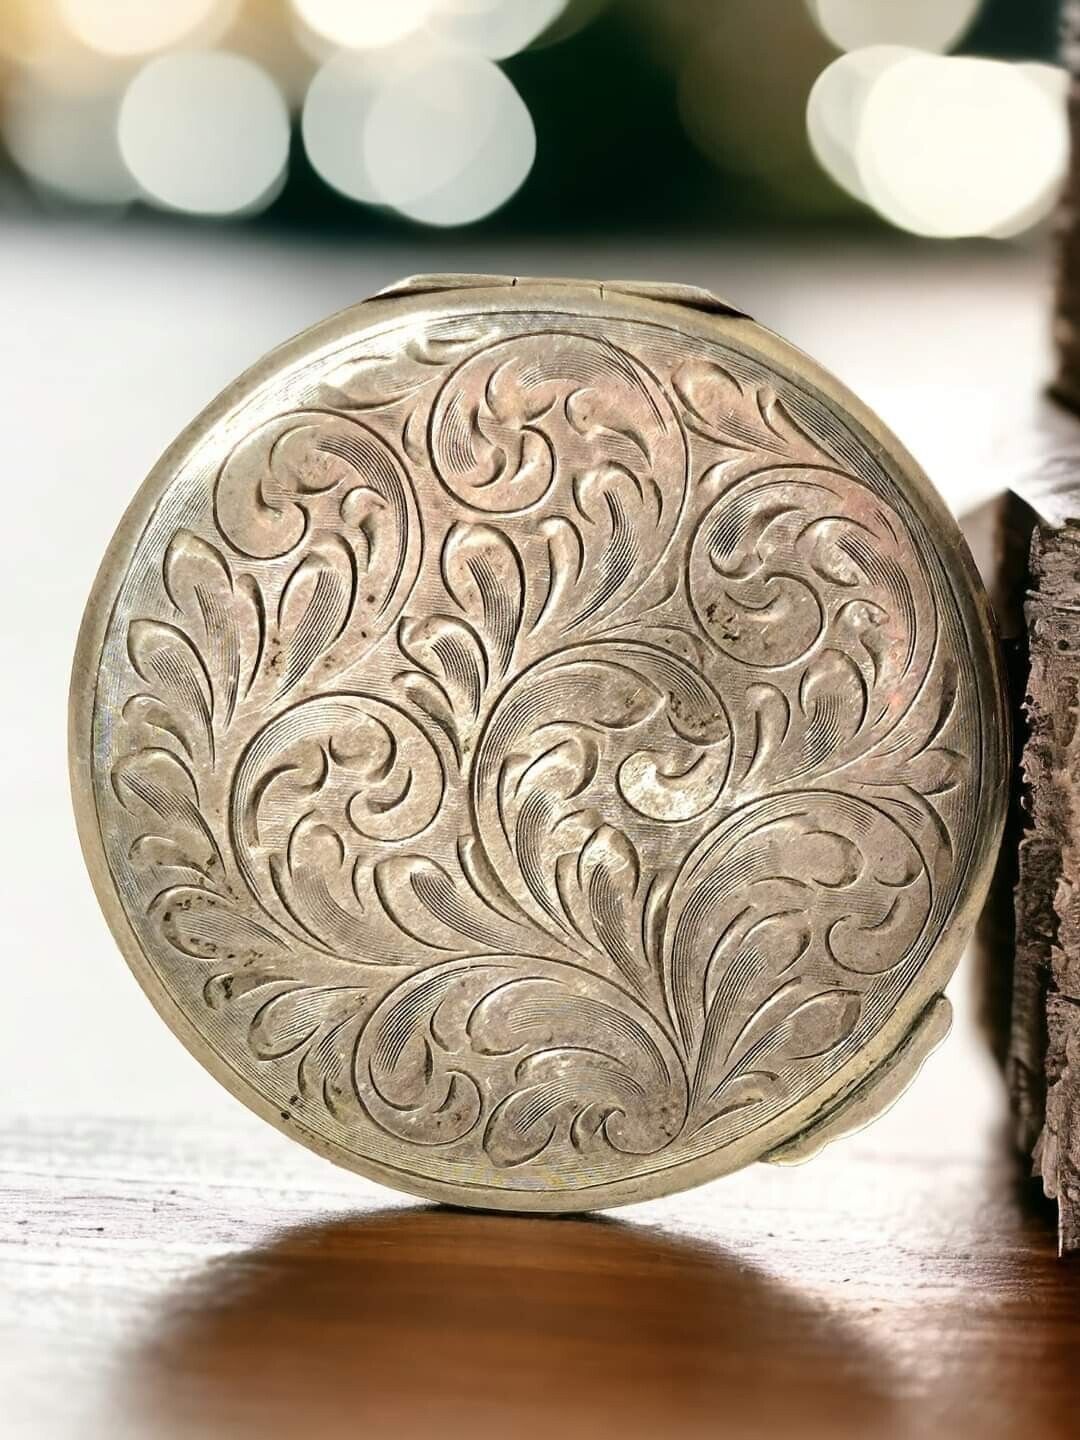 🔥 Vintage 1940s BIRKS STERLING SILVER Art Deco MIRRORED COMPACT 